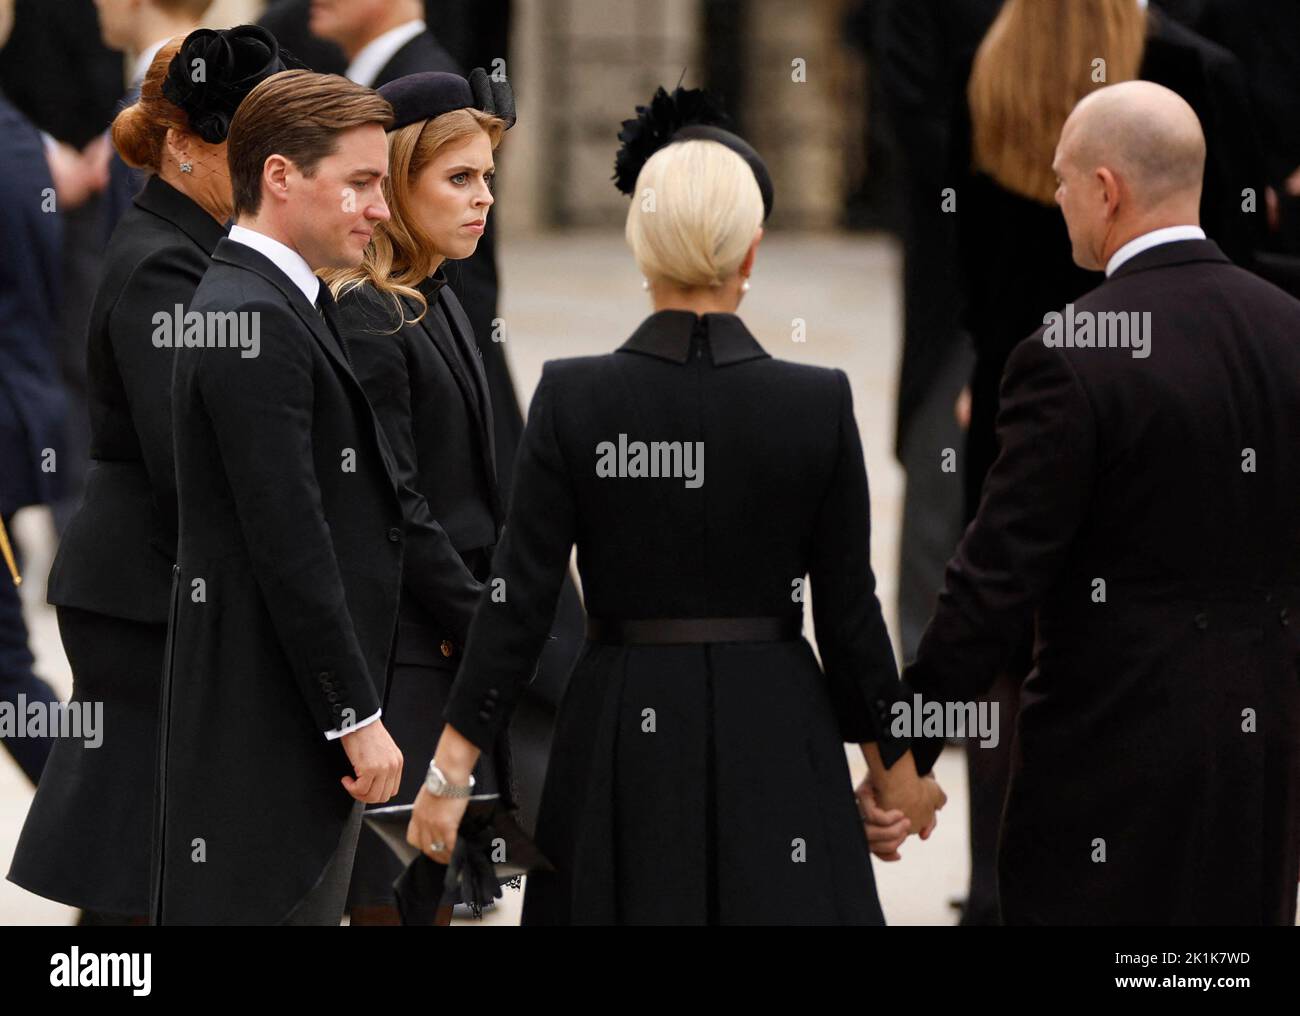 Britain's Princess Beatrice with husband Edoardo Mapelli Mozzi outside Westminster Abbey on the day of the state funeral and burial of Britain's Queen Elizabeth, in London, Britain, September 19, 2022 REUTERS/John Sibley Stock Photo